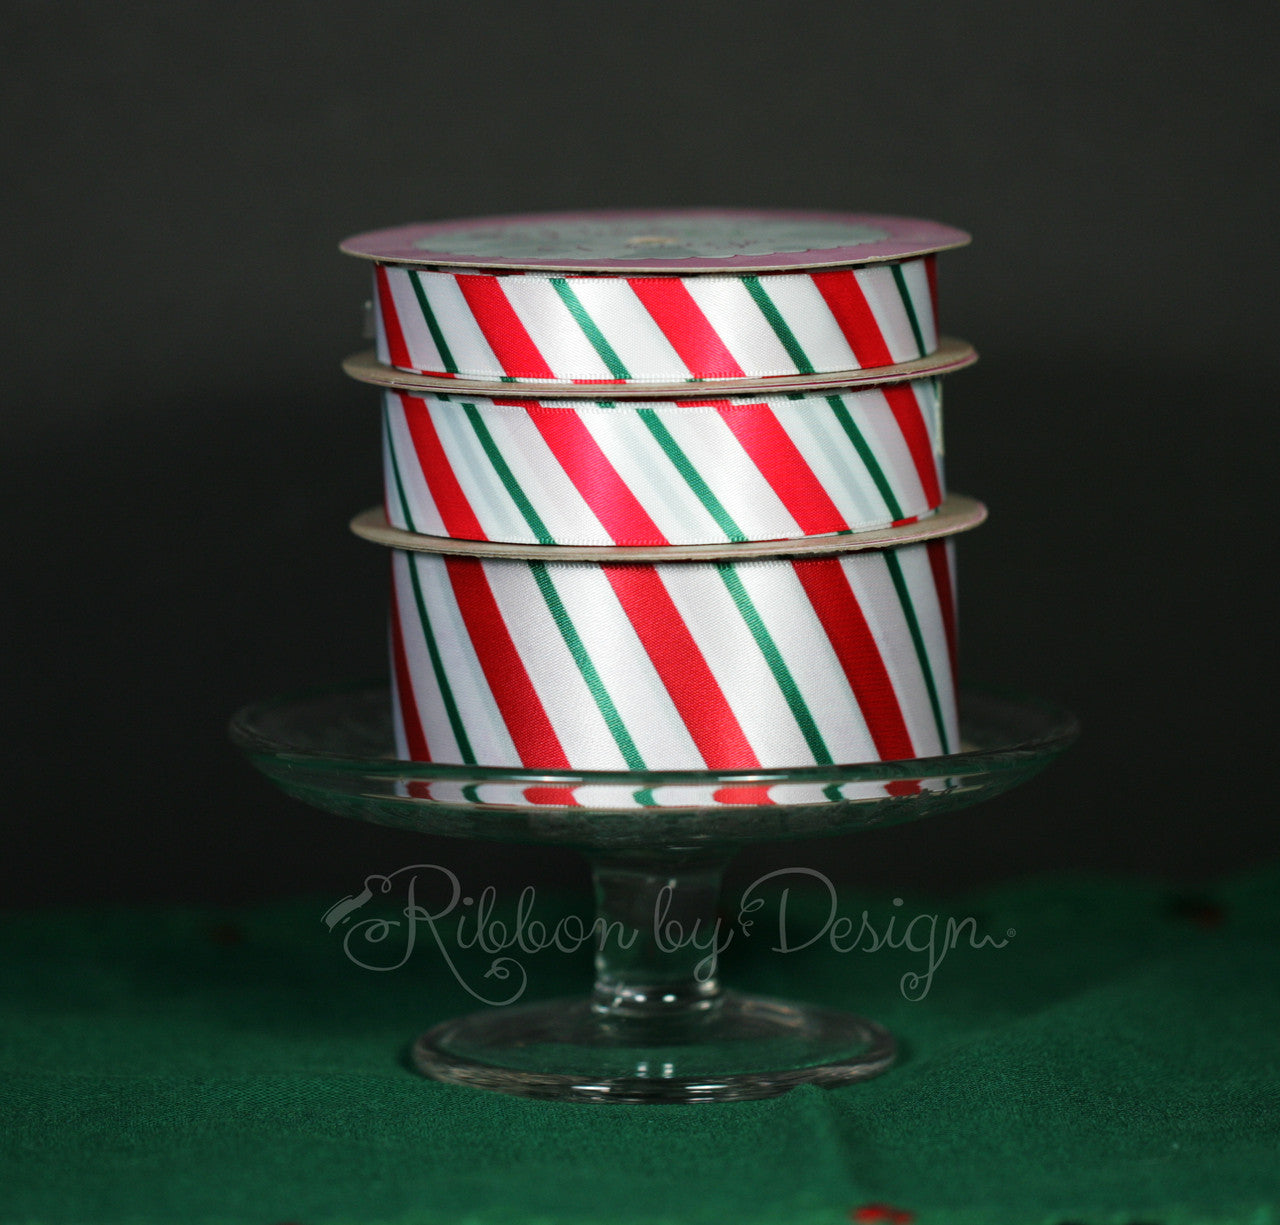 Our candy cane stripes come in three sizes to accommodate any size gift you may be wrapping!